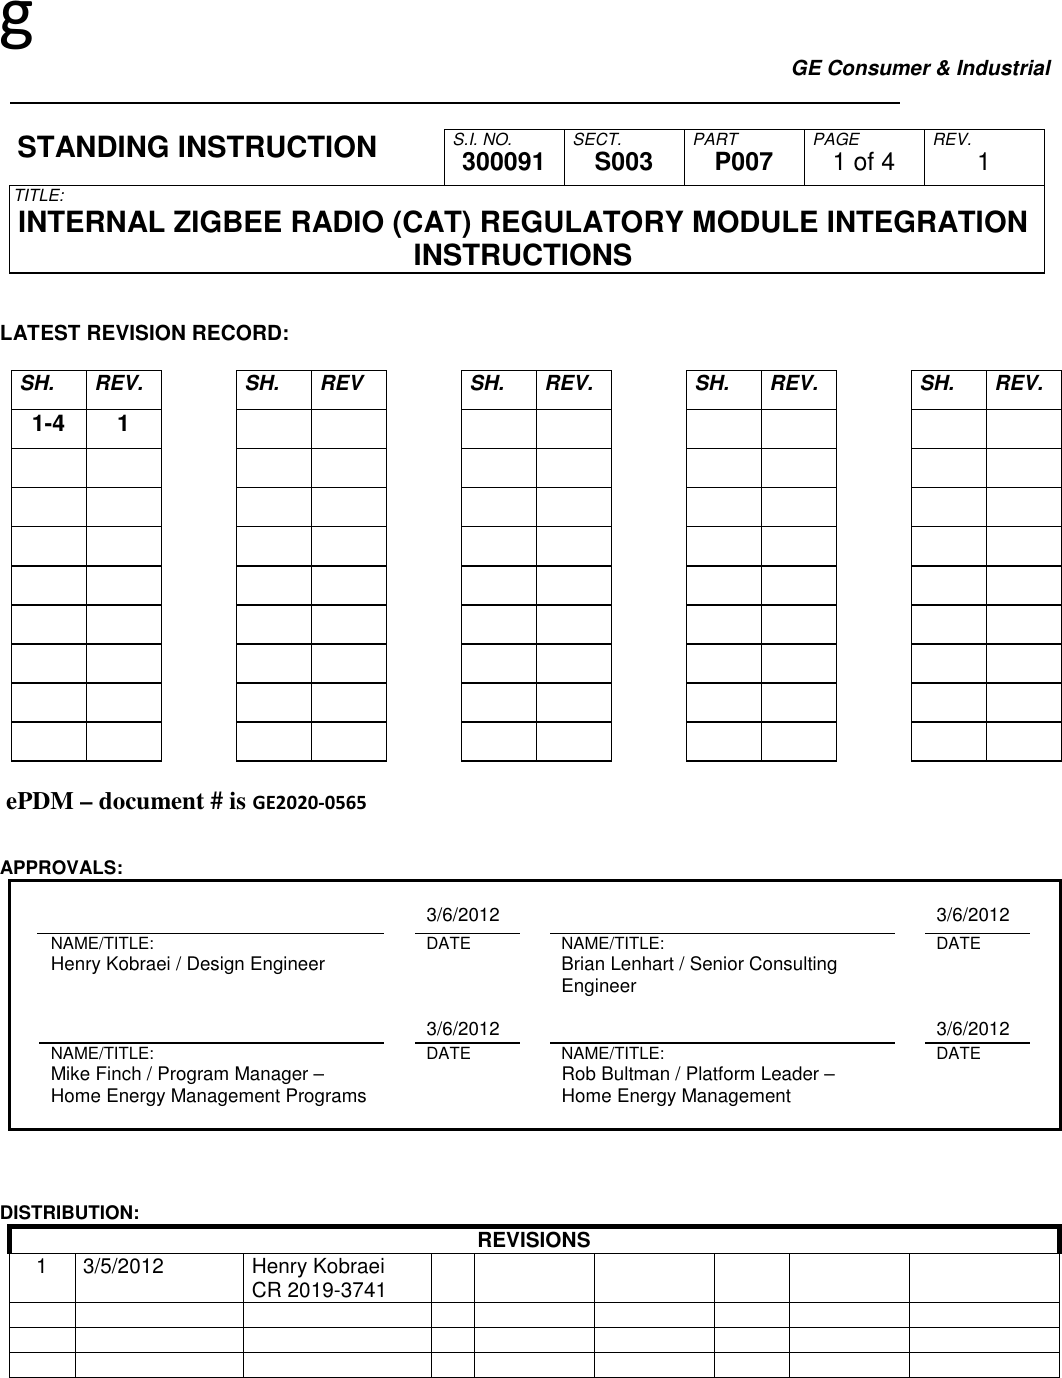 g GE Consumer &amp; Industrial     S.I. NO. SECT. PART PAGE REV. STANDING INSTRUCTION  300091  S003  P007  1 of 4  1 TITLE: INTERNAL ZIGBEE RADIO (CAT) REGULATORY MODULE INTEGRATION INSTRUCTIONS   LATEST REVISION RECORD:  SH.  REV.    SH.  REV    SH.  REV.    SH.  REV.    SH.  REV. 1-4 1                                                                                                                                ePDM – document # is GE2020-0565   APPROVALS:        3/6/2012         3/6/2012     NAME/TITLE:    DATE    NAME/TITLE:    DATE     Henry Kobraei / Design Engineer        Brian Lenhart / Senior Consulting Engineer              3/6/2012         3/6/2012     NAME/TITLE:    DATE    NAME/TITLE:    DATE     Mike Finch / Program Manager – Home Energy Management Programs        Rob Bultman / Platform Leader – Home Energy Management                             DISTRIBUTION: REVISIONS 1  3/5/2012  Henry Kobraei CR 2019-3741                                                                